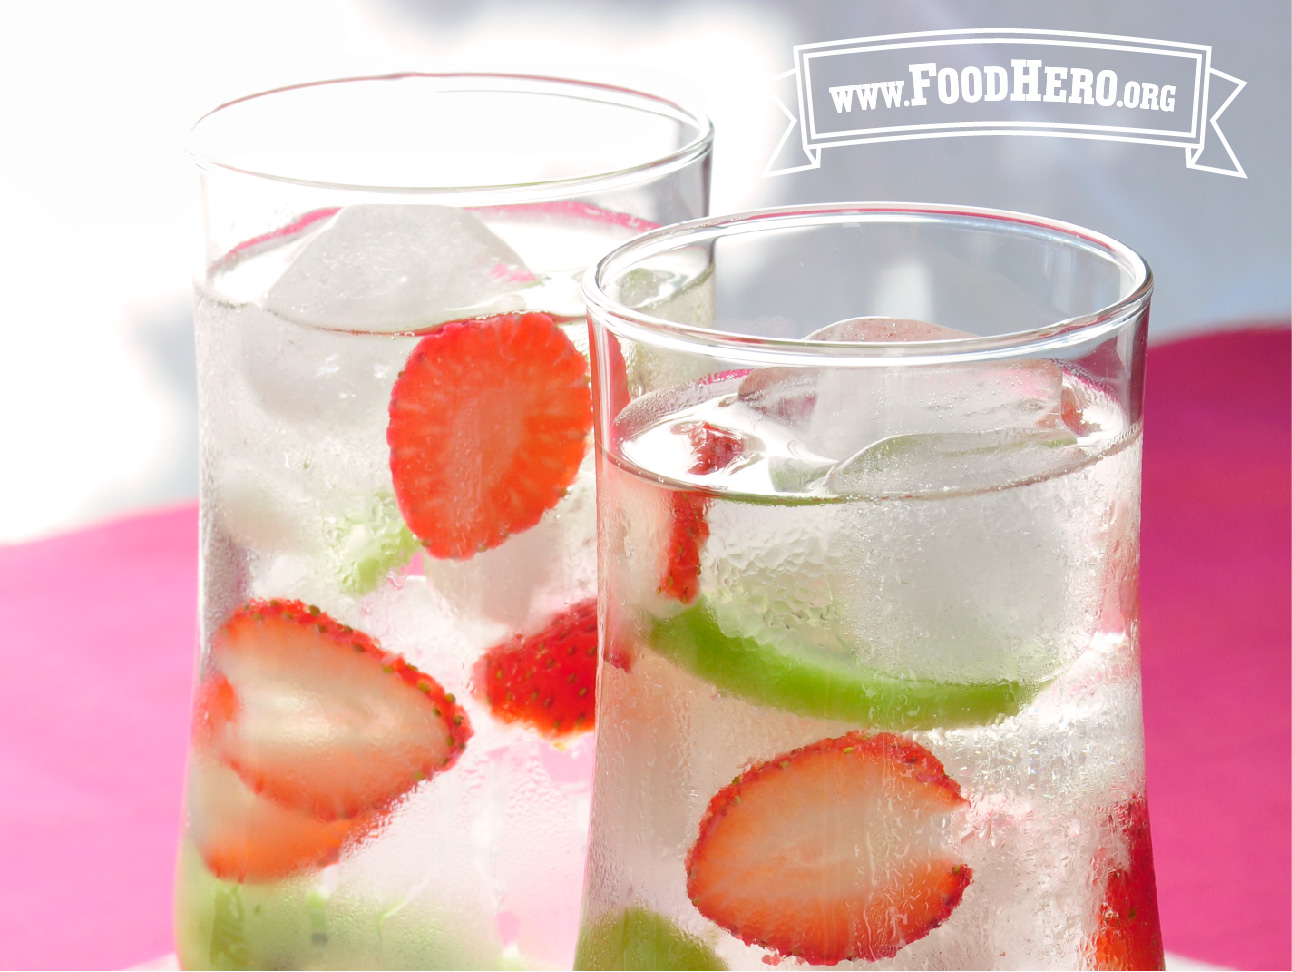 Strawberry Kiwi Flavored Water - Purdue Extension Nutrition Education  Program